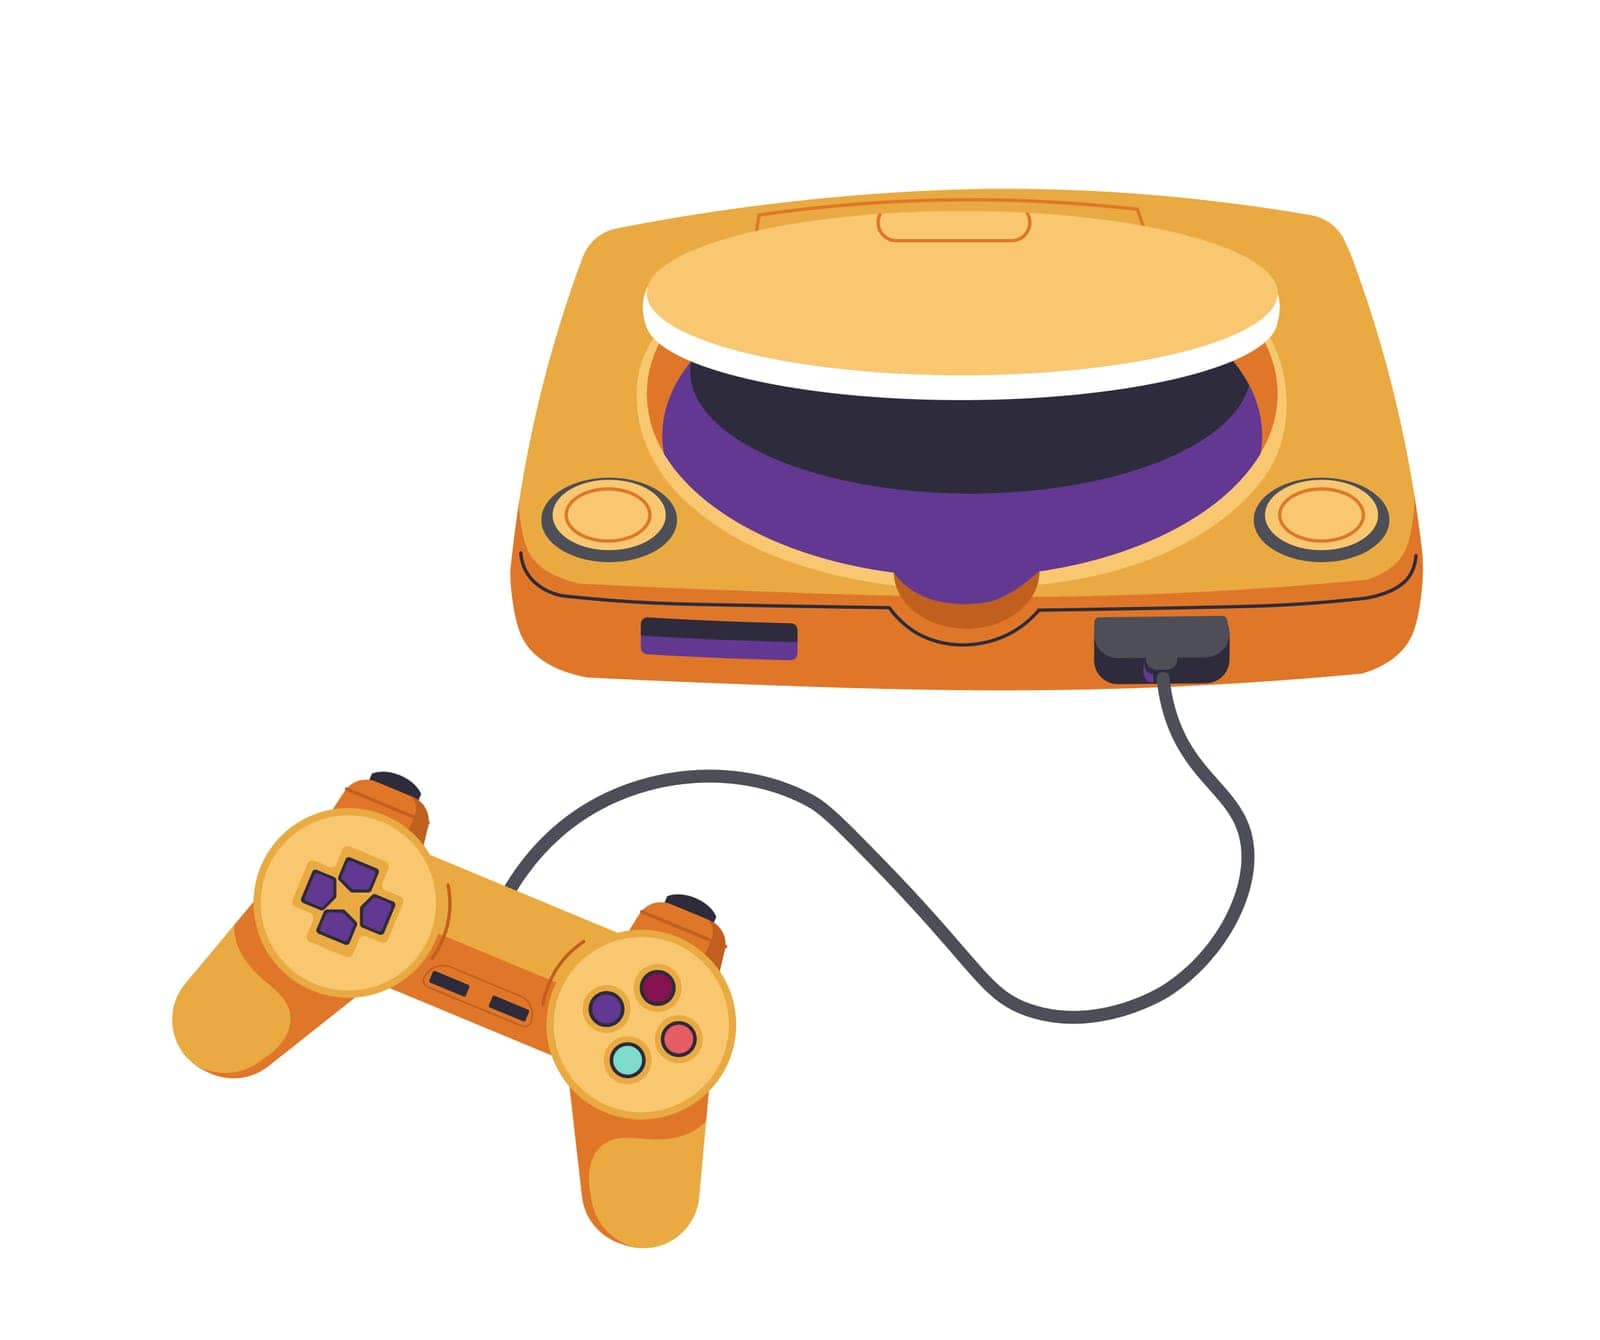 Playstation with discs and joystick on the wire, video game console for playing fun arcades. Entertainment and fun, leisure activities for kids and adults. Gaming gadgets. Vector in flat style